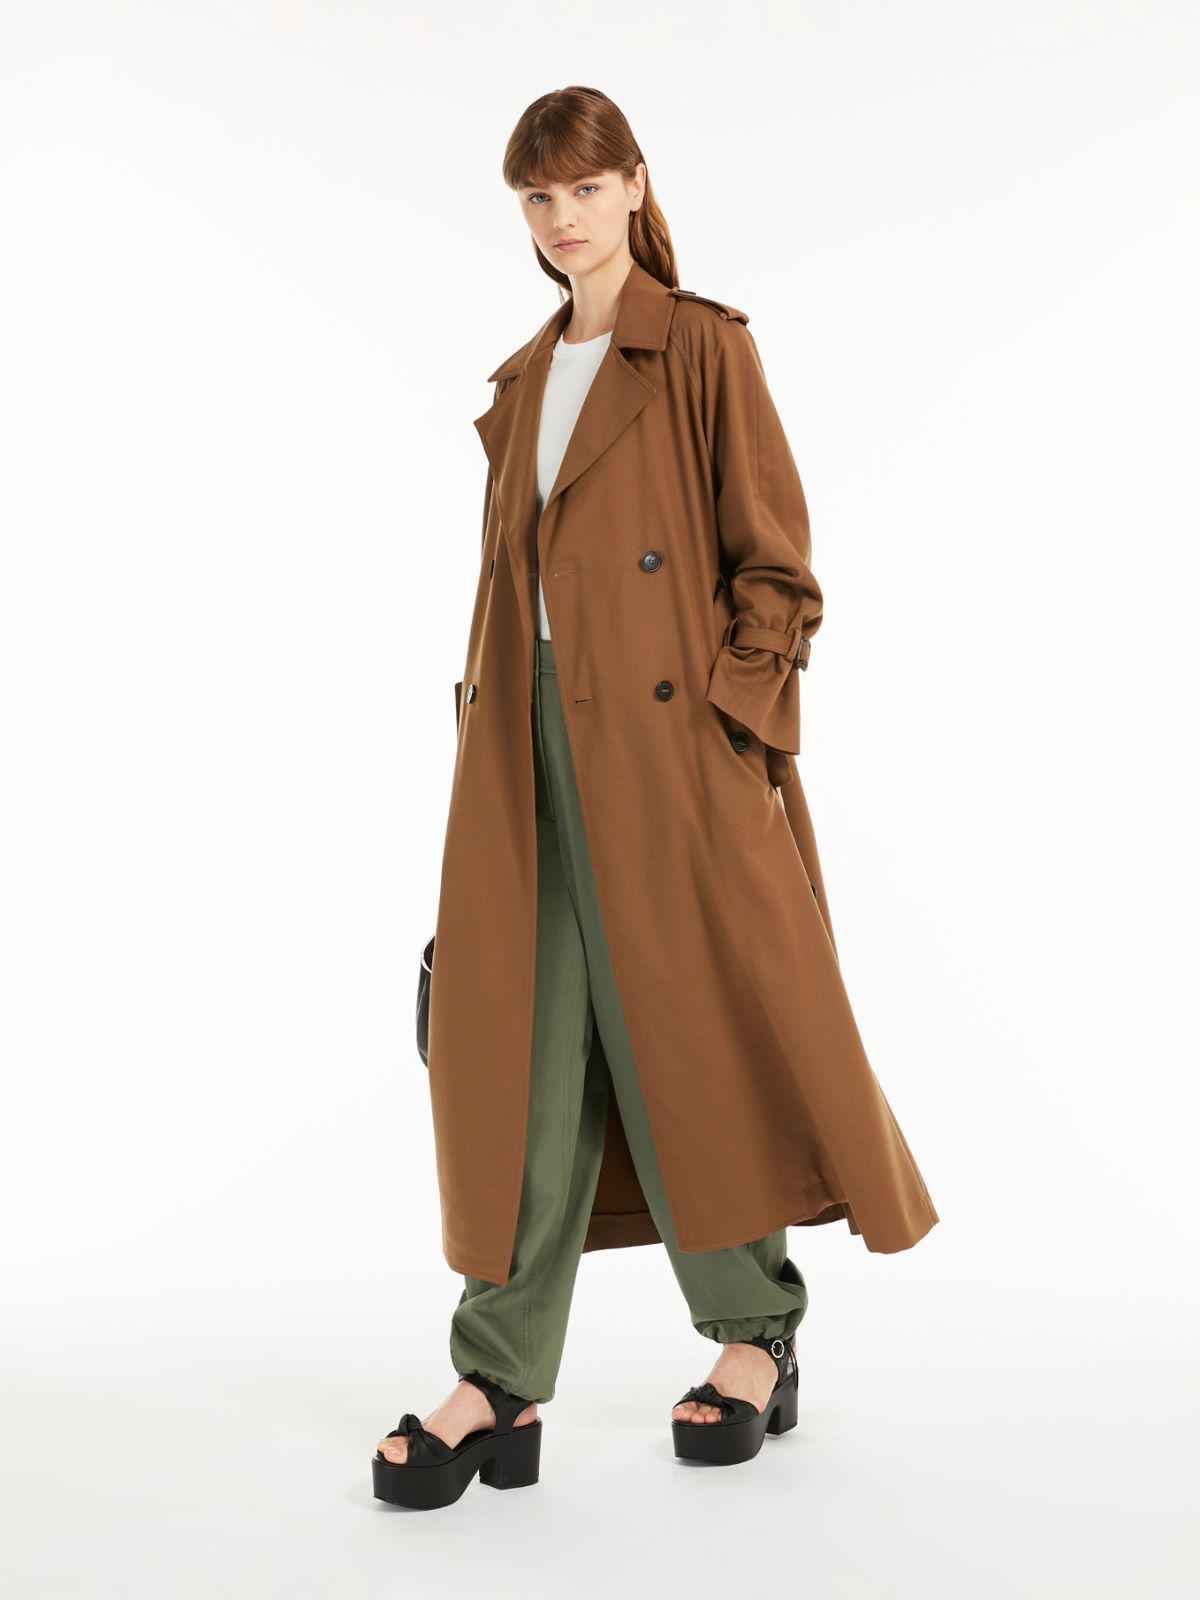 Belted trench coat in fabric, tobacco | Weekend Max Mara